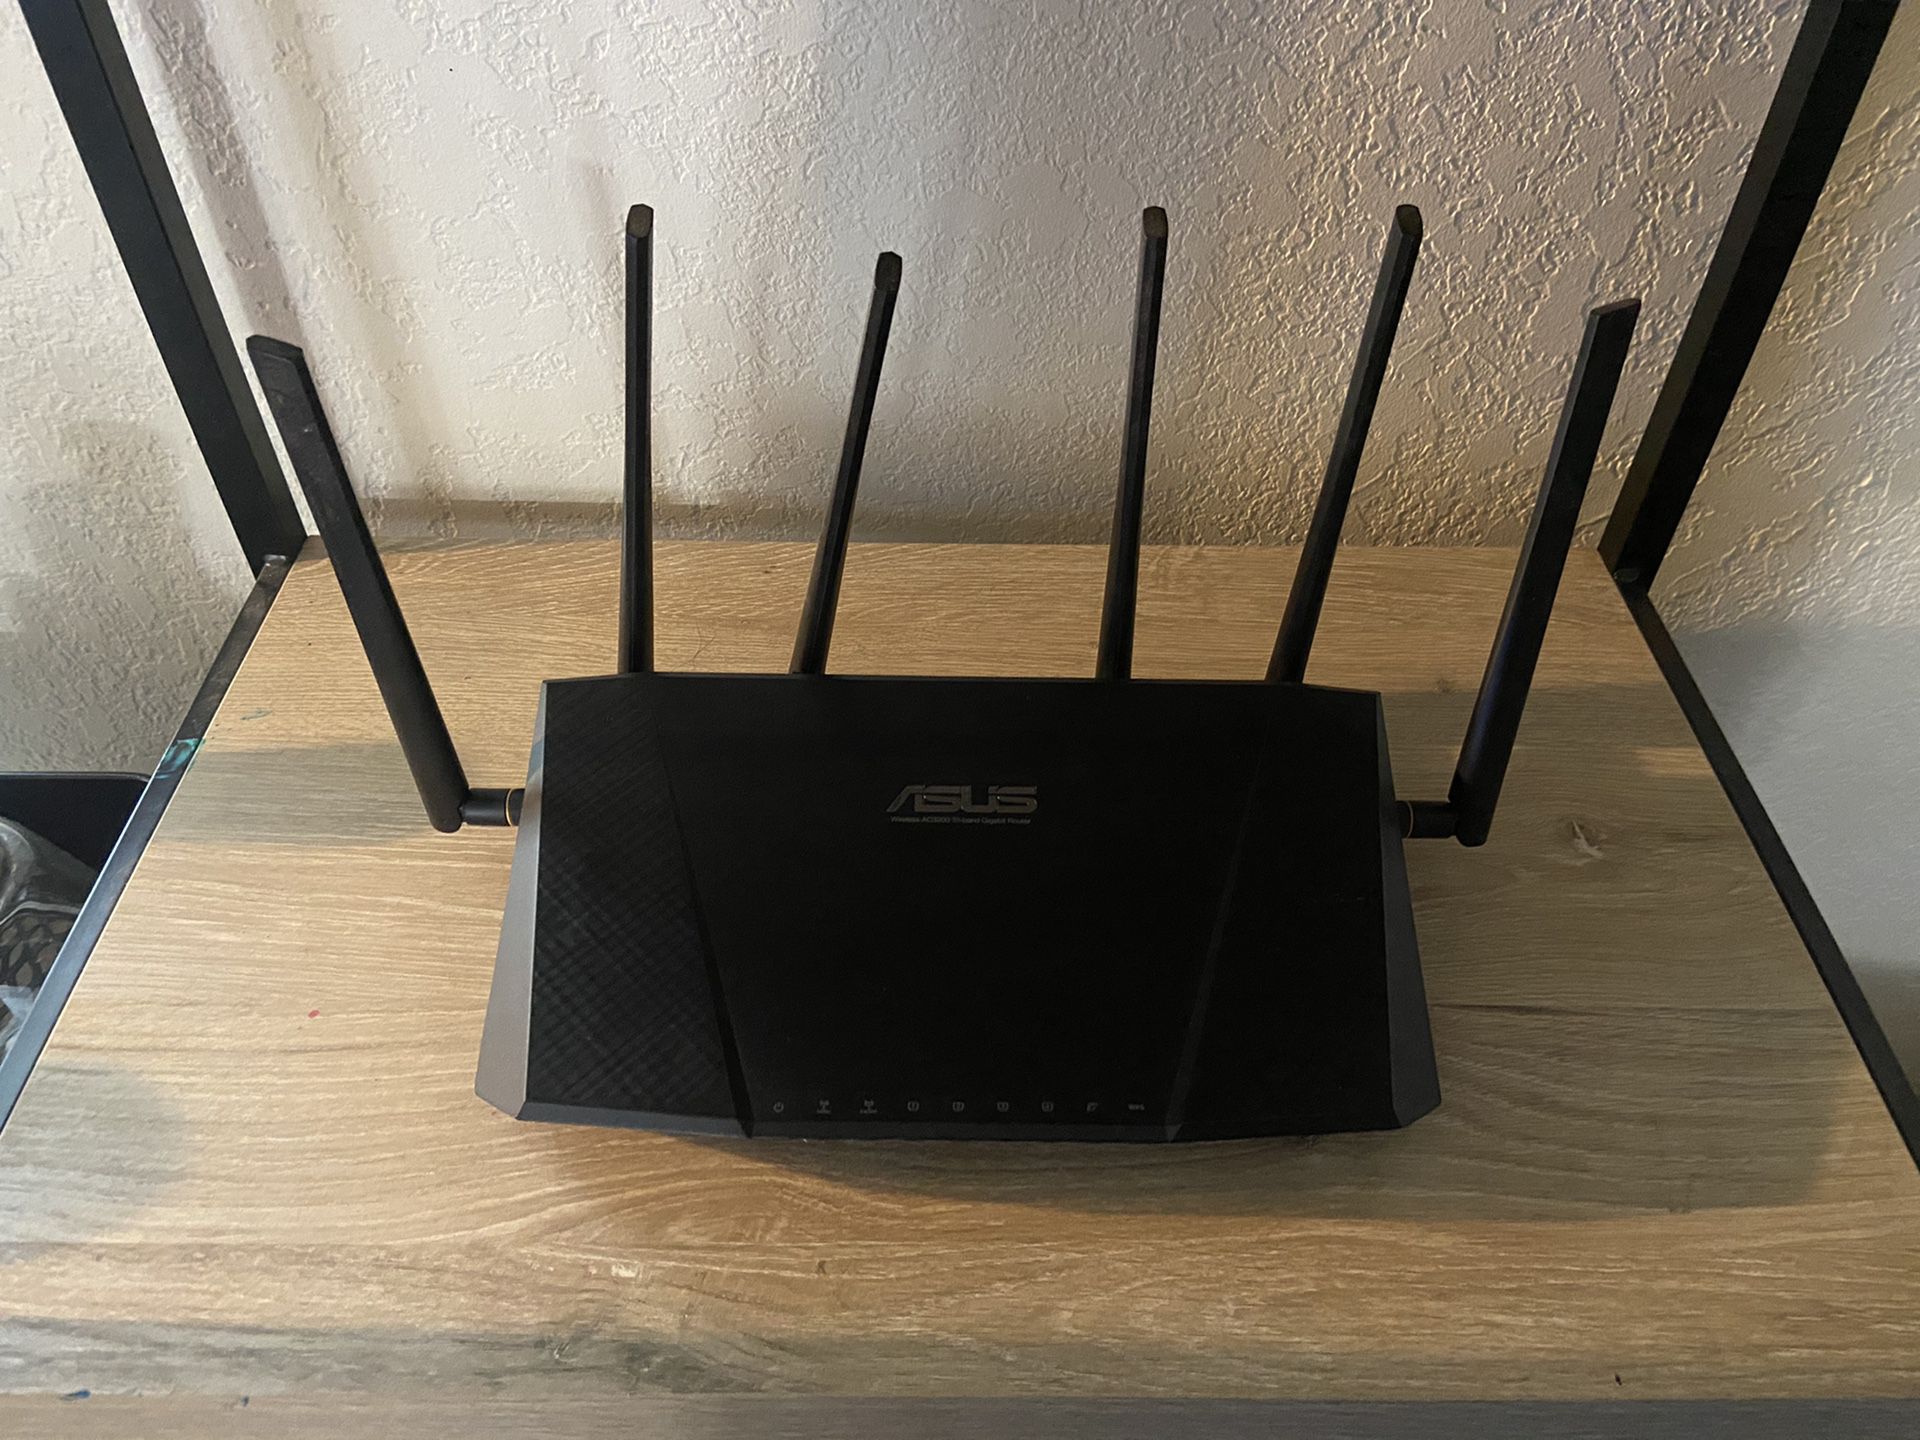 ASUS RT-AC3200 Tri-Band Router